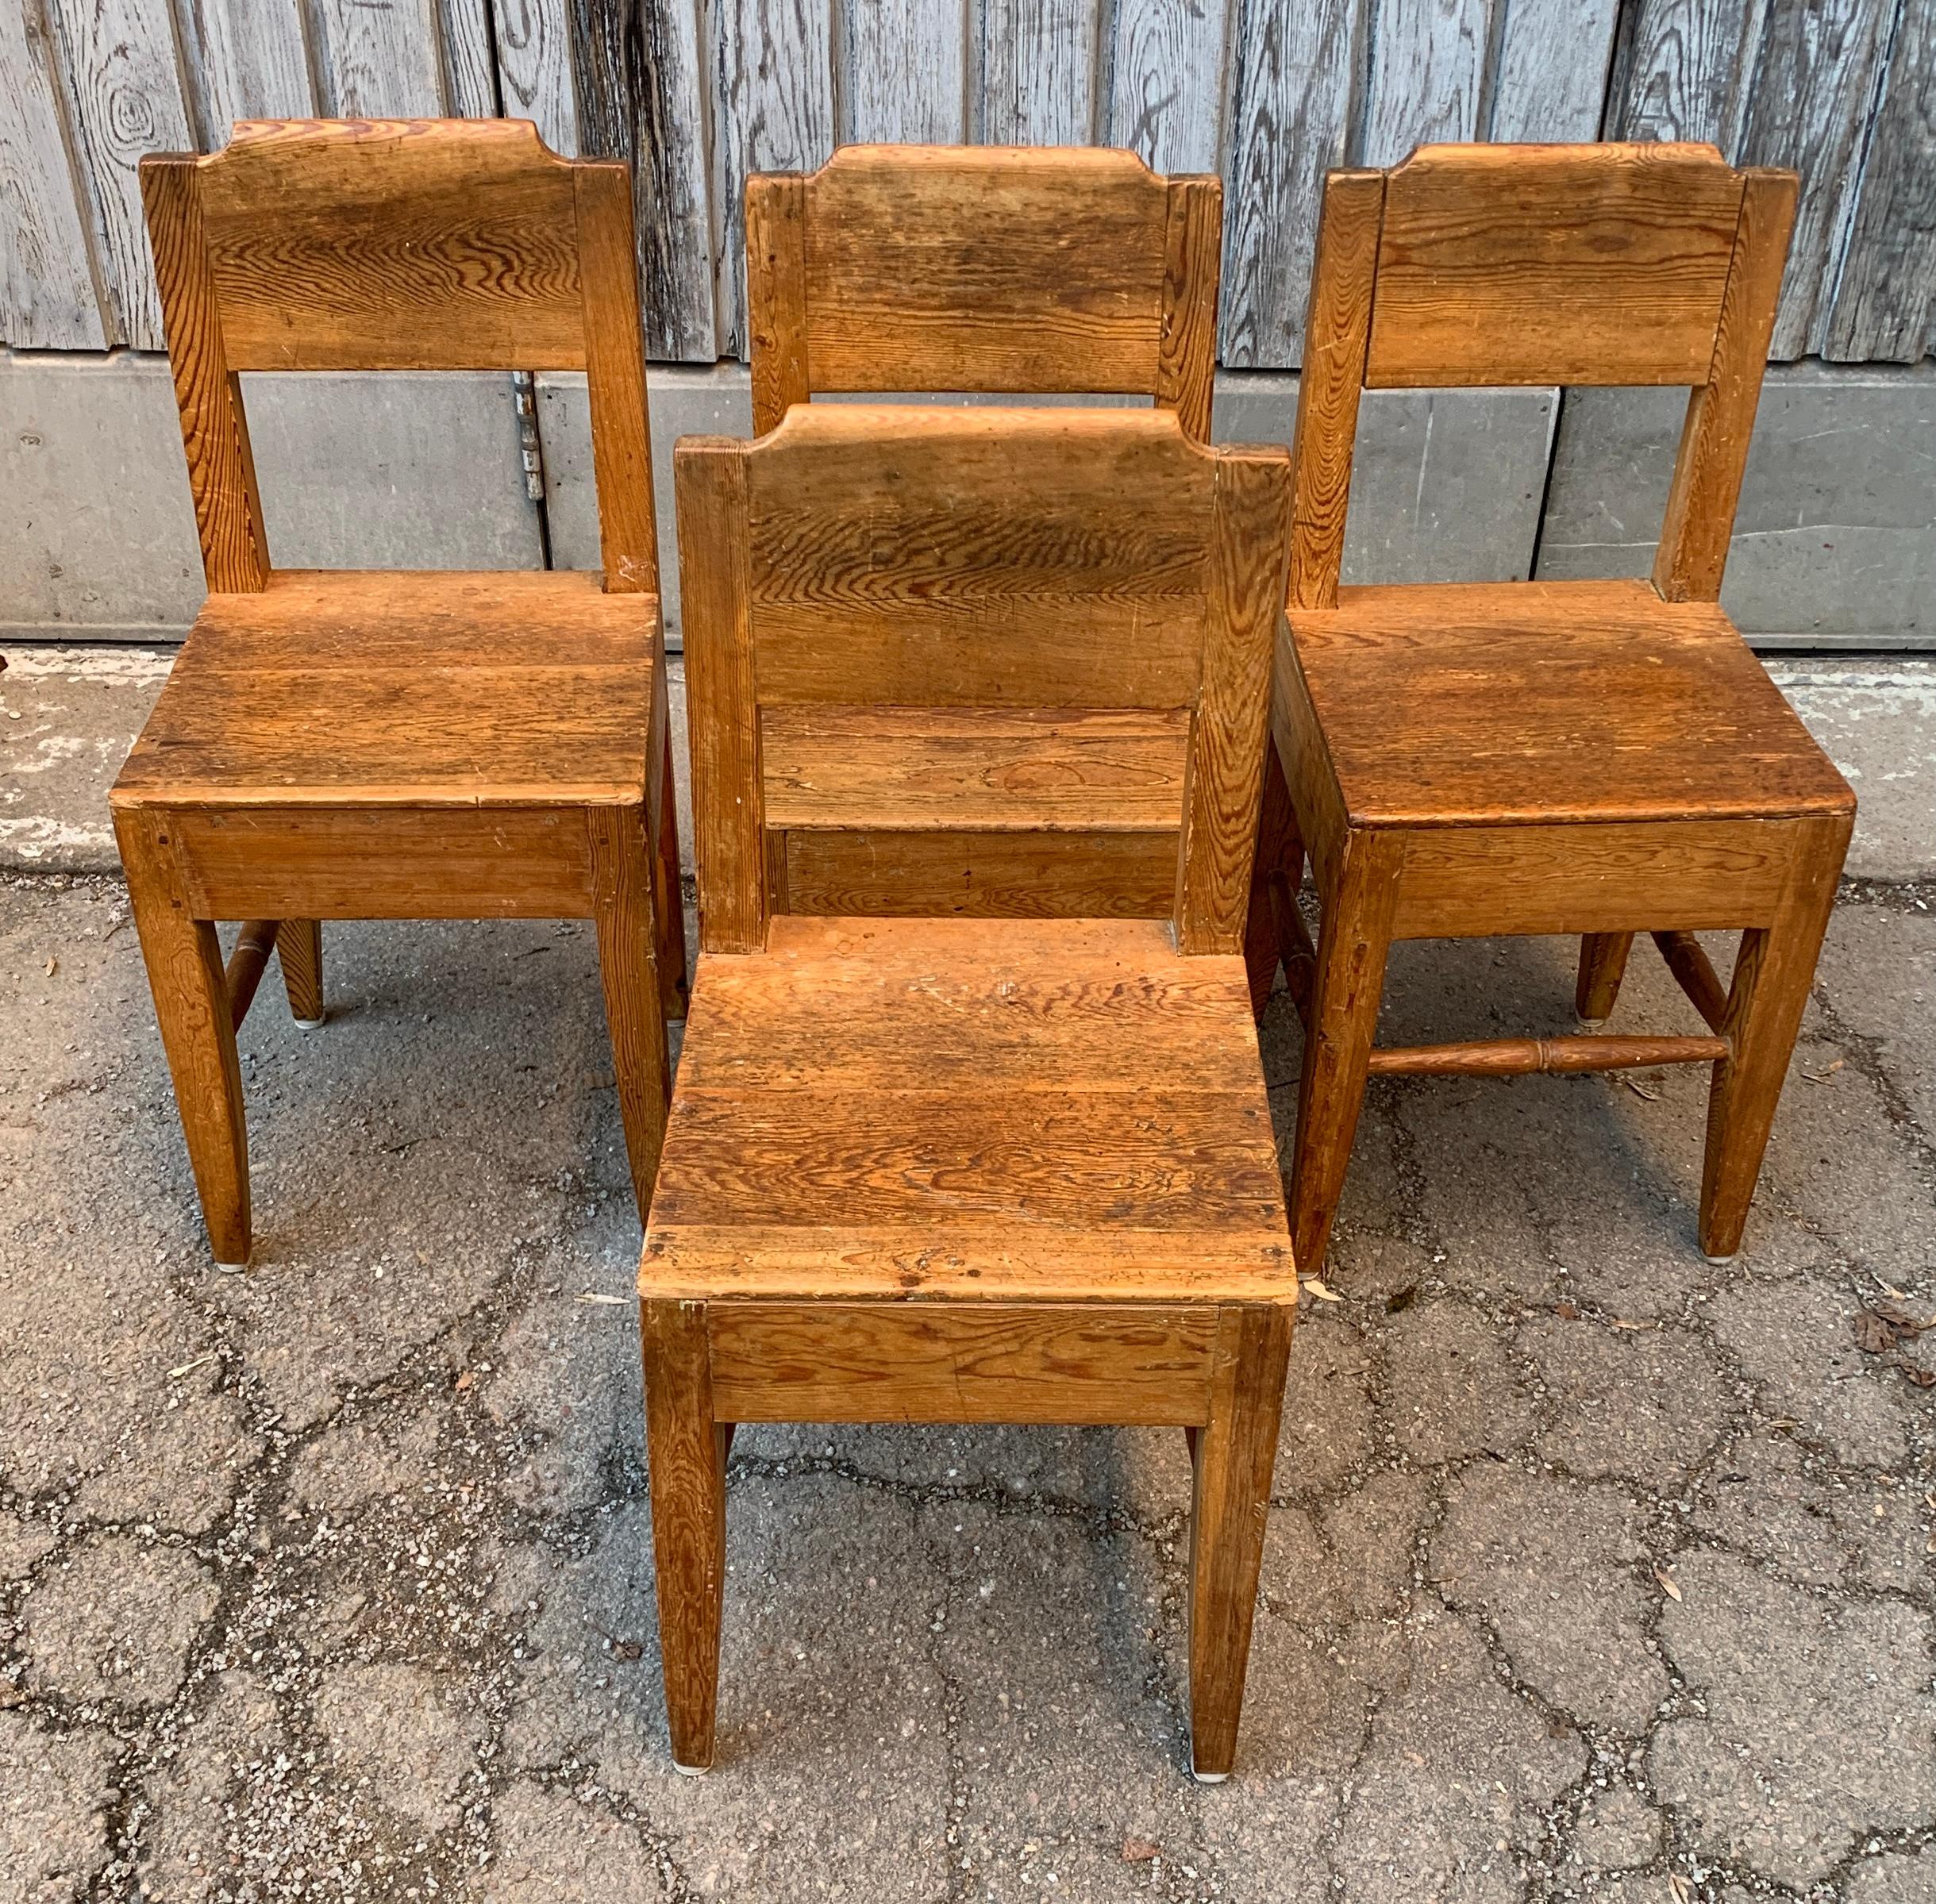 Set of 4 Small Swedish Folk Art Chairs, Early 19th Century In Good Condition For Sale In Haddonfield, NJ